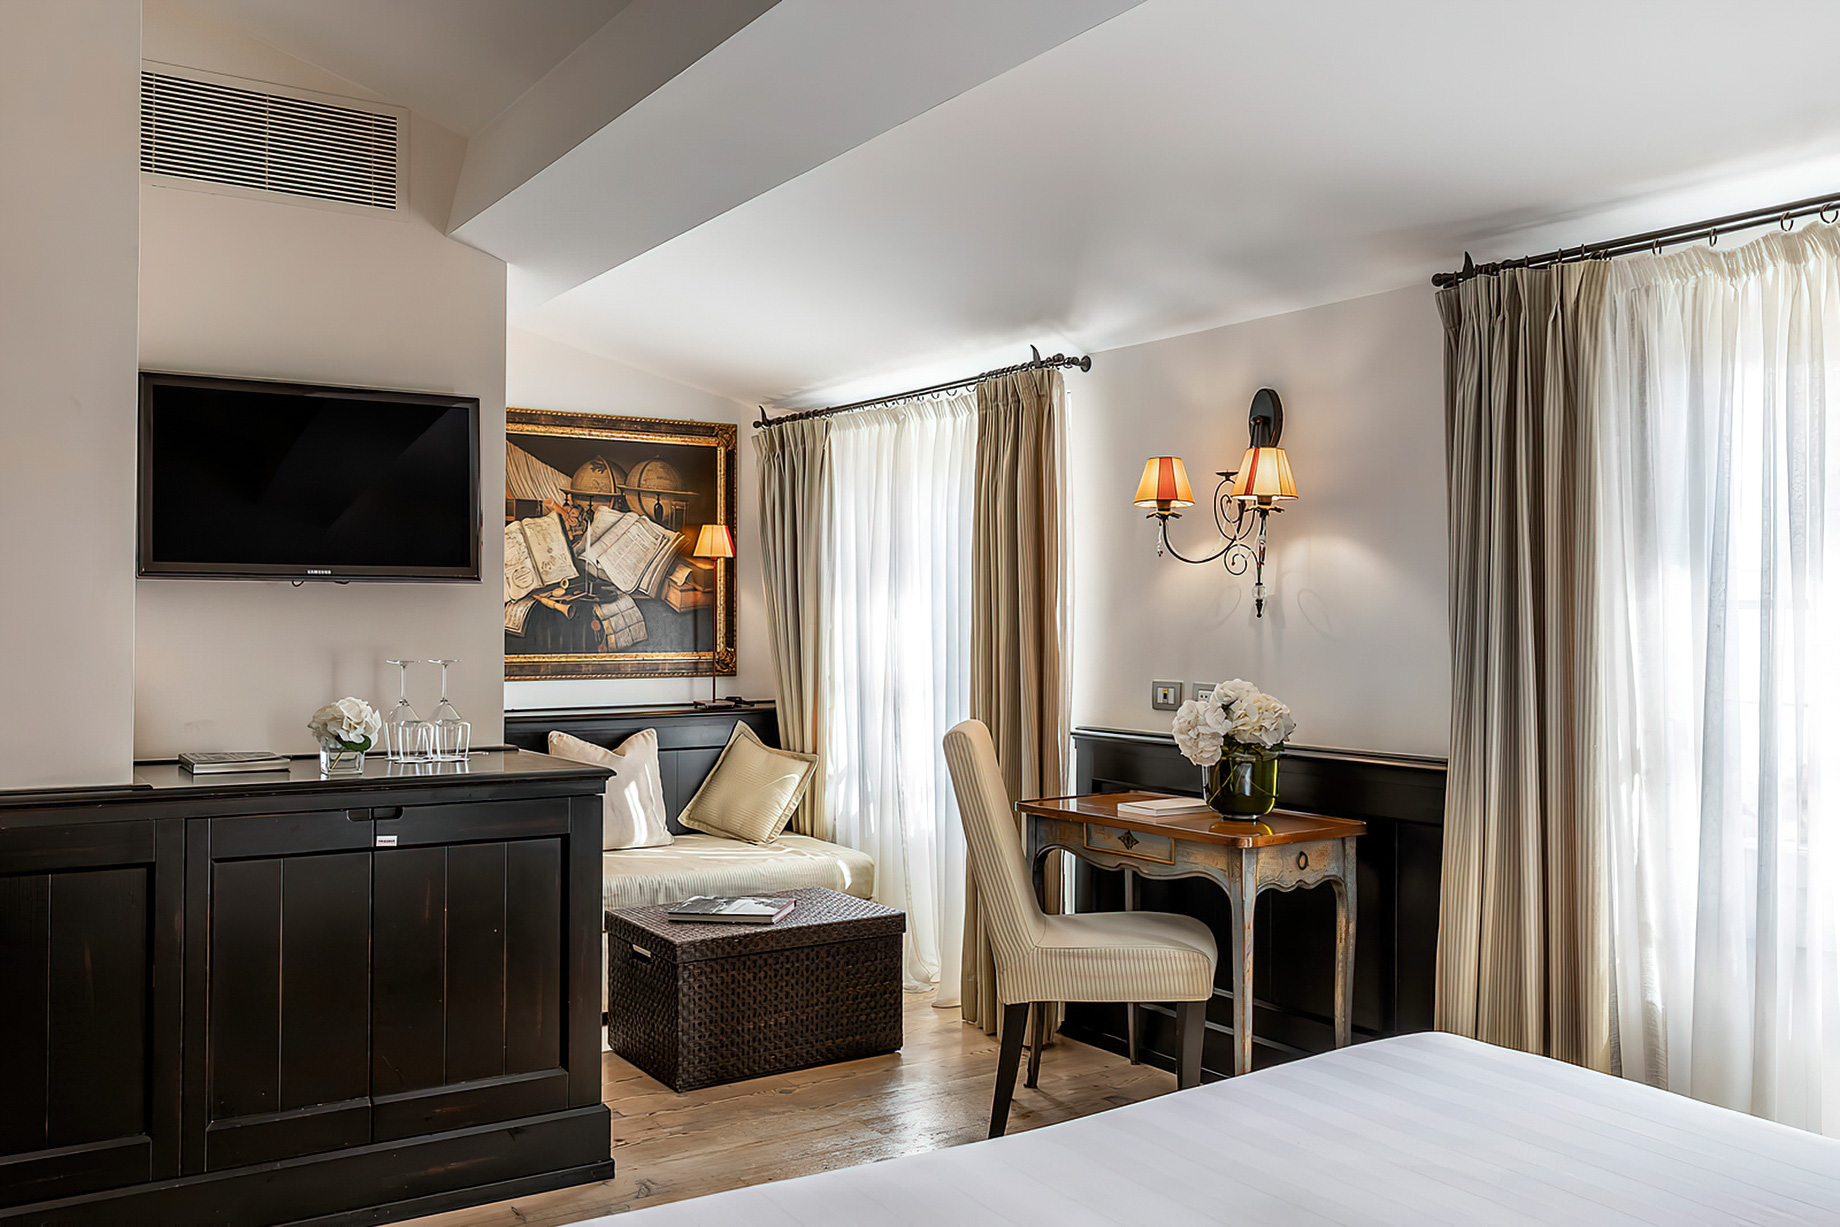 Relais Santa Croce By Baglioni Hotels & Resorts - Florence, Italy - Grand Deluxe Room